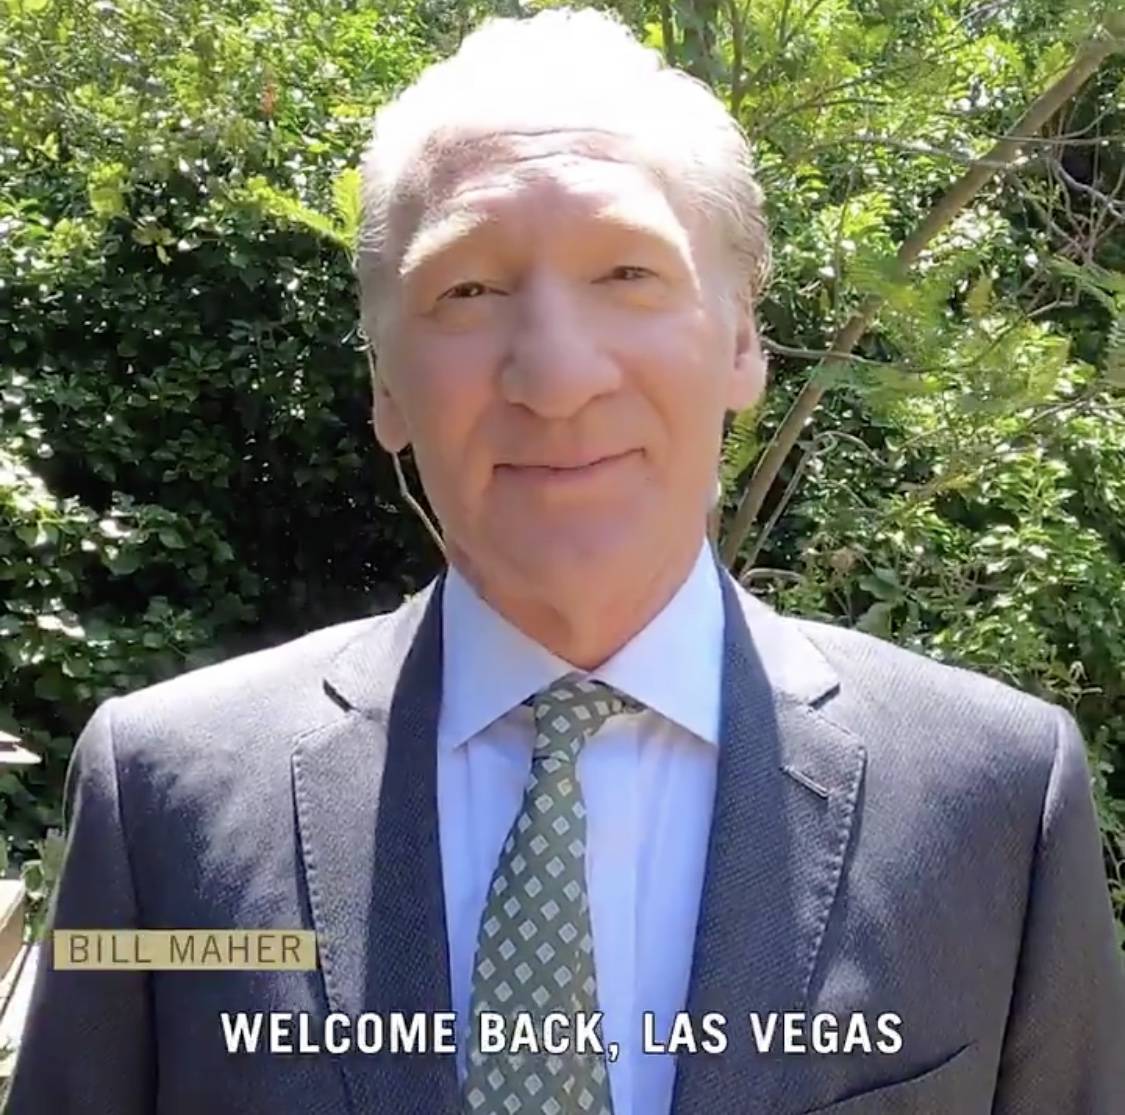 Comic headliner Bill Maher is shown in a new social media campaign launched by MGM Resorts Inte ...